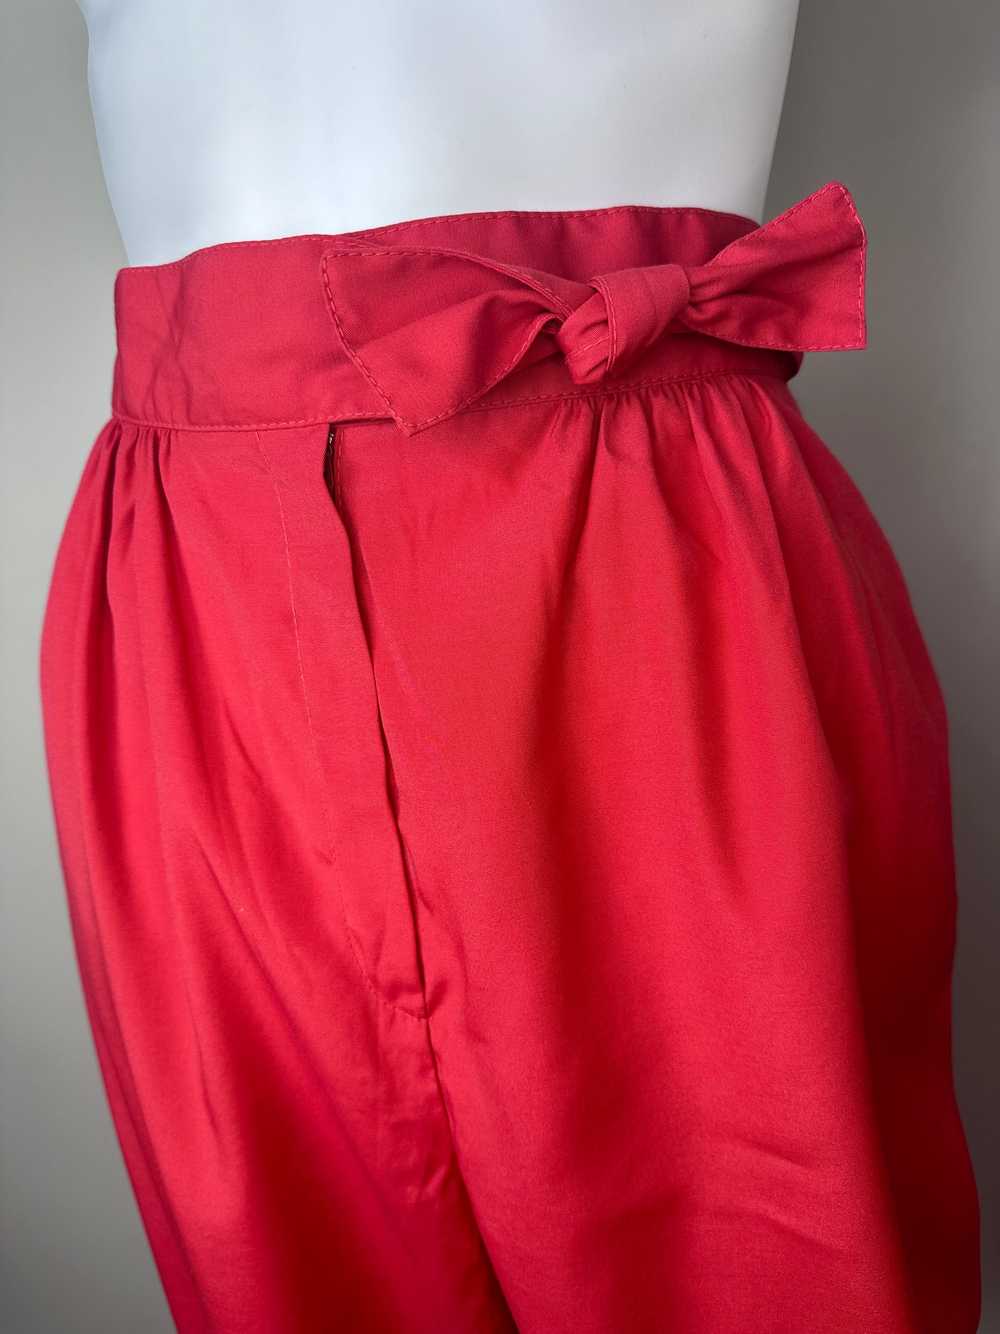 1980s Red Pants with Bow Waistband, Seprets Size … - image 2